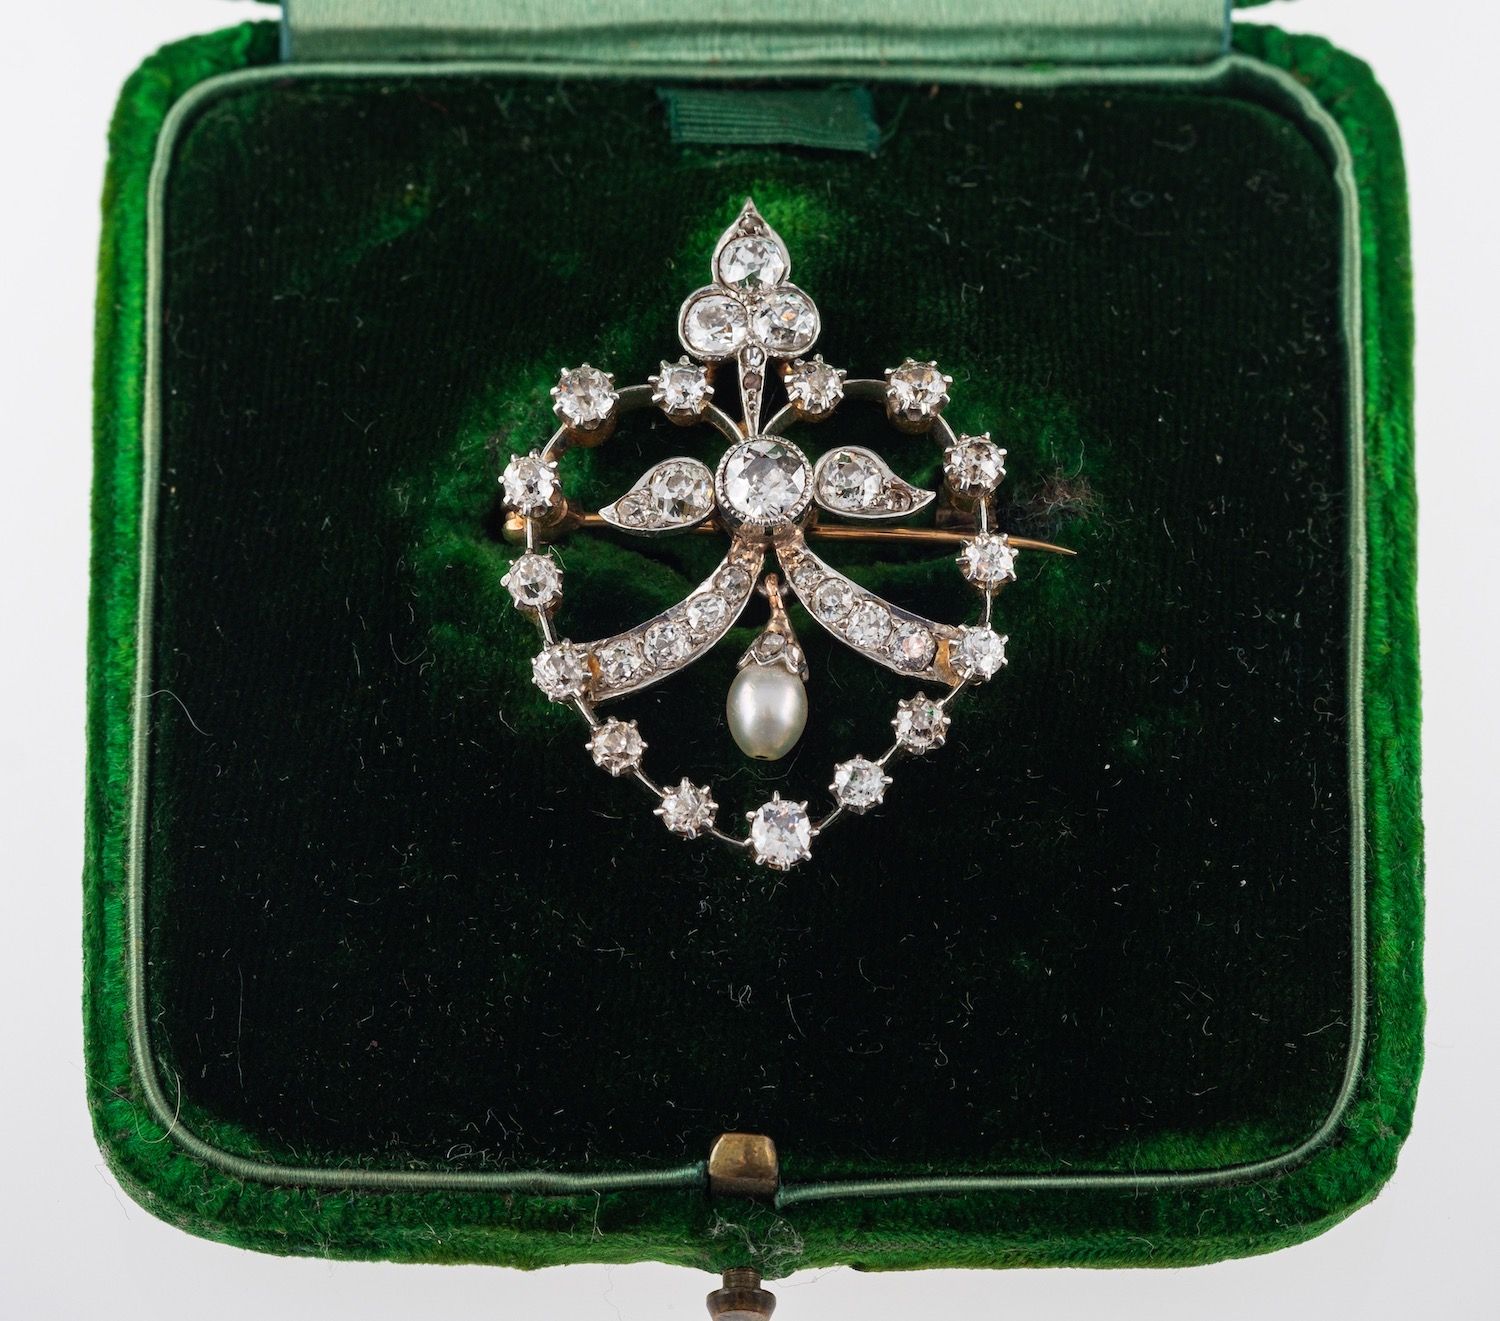 A Belle Epoque diamond & pearl brooch, - Image 2 of 3